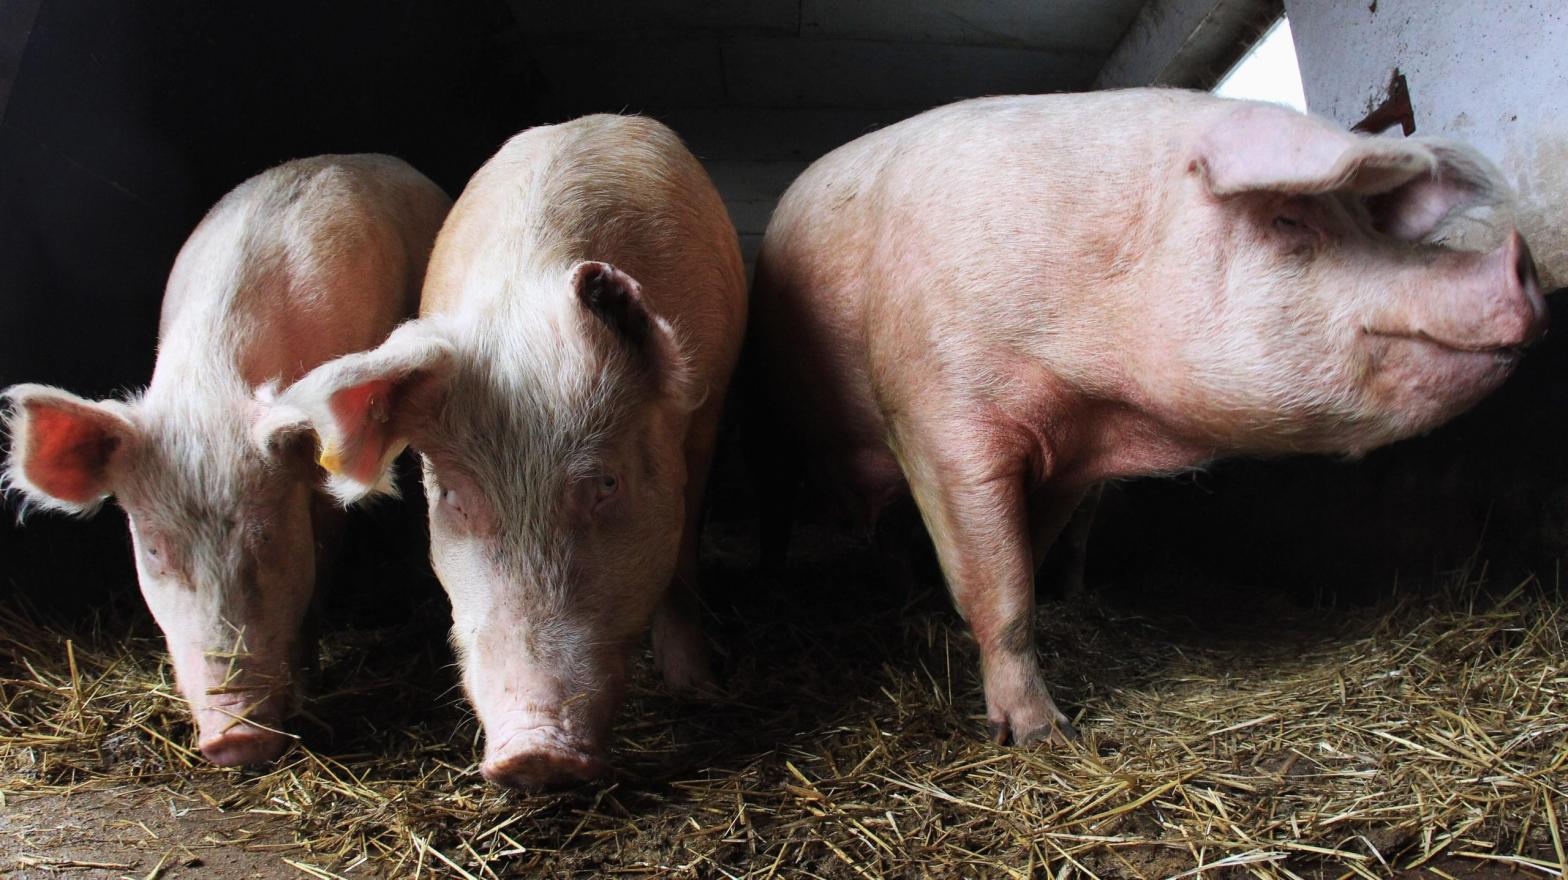 Pigs were able to breathe through their gut when rectally injected with an oxygenated chemical as part of a new study. (Photo: Photo by Joern Pollex/Getty Images, Getty Images)